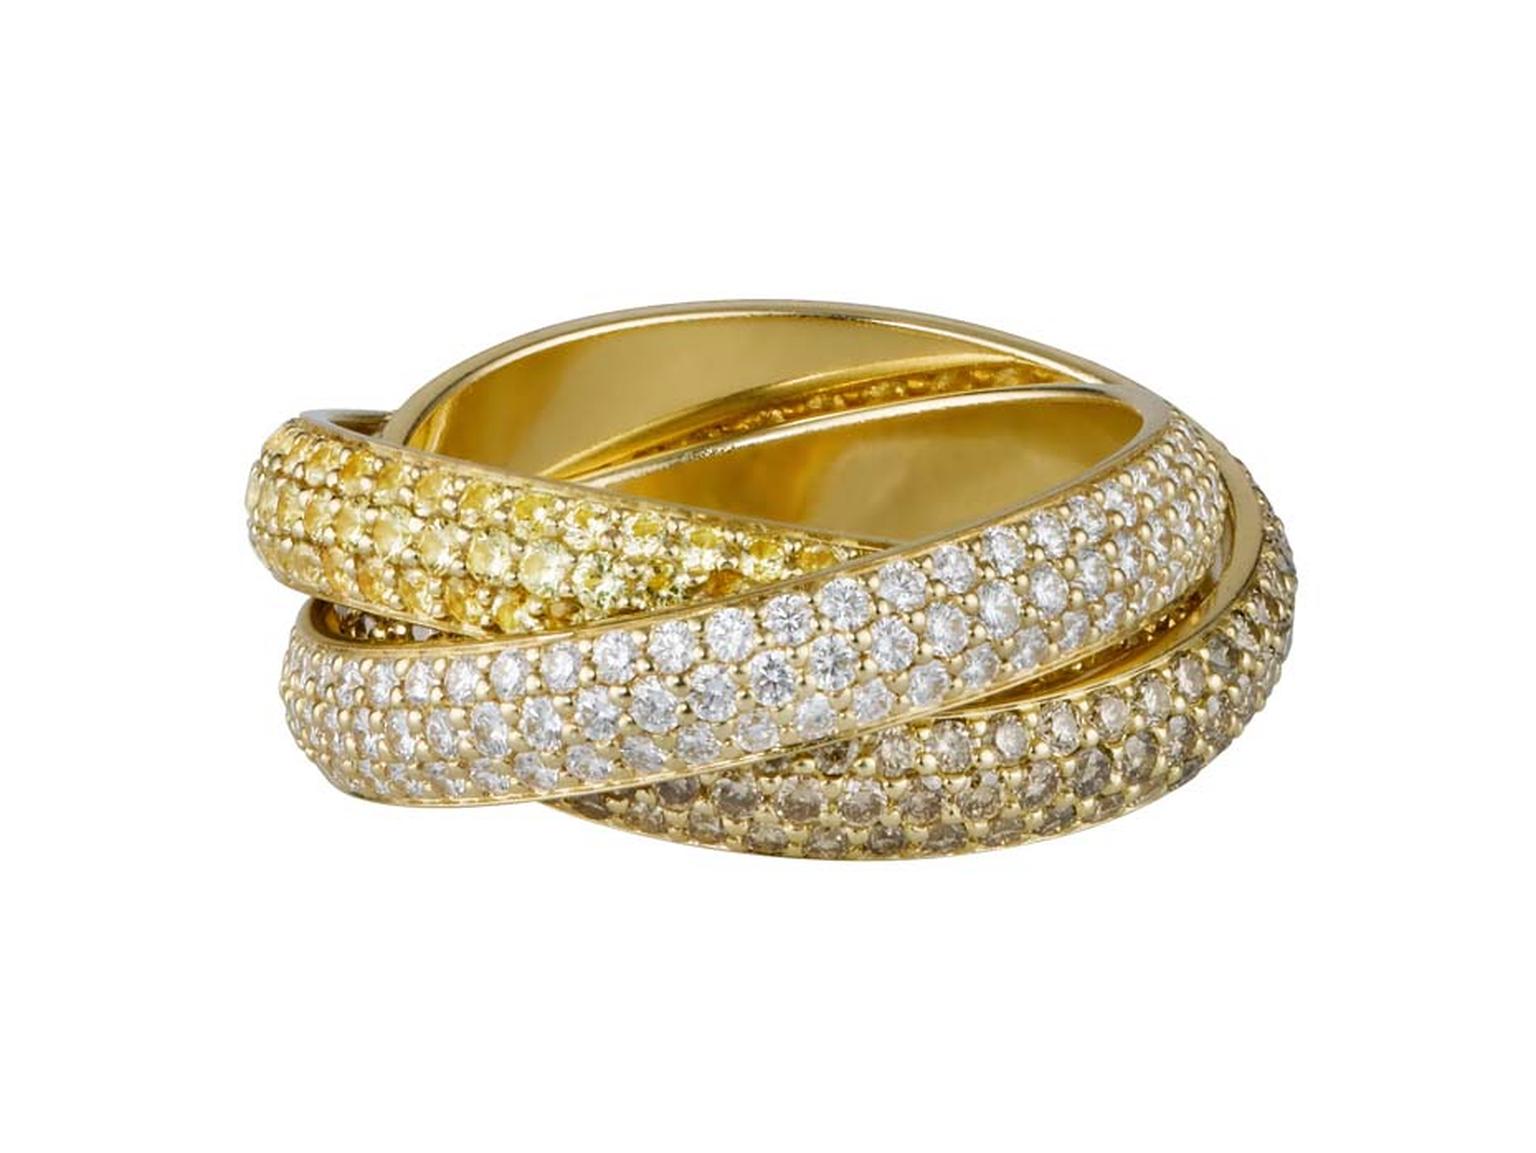 Cartier Trinity ring in rose, yellow and white gold all swathed in diamonds.